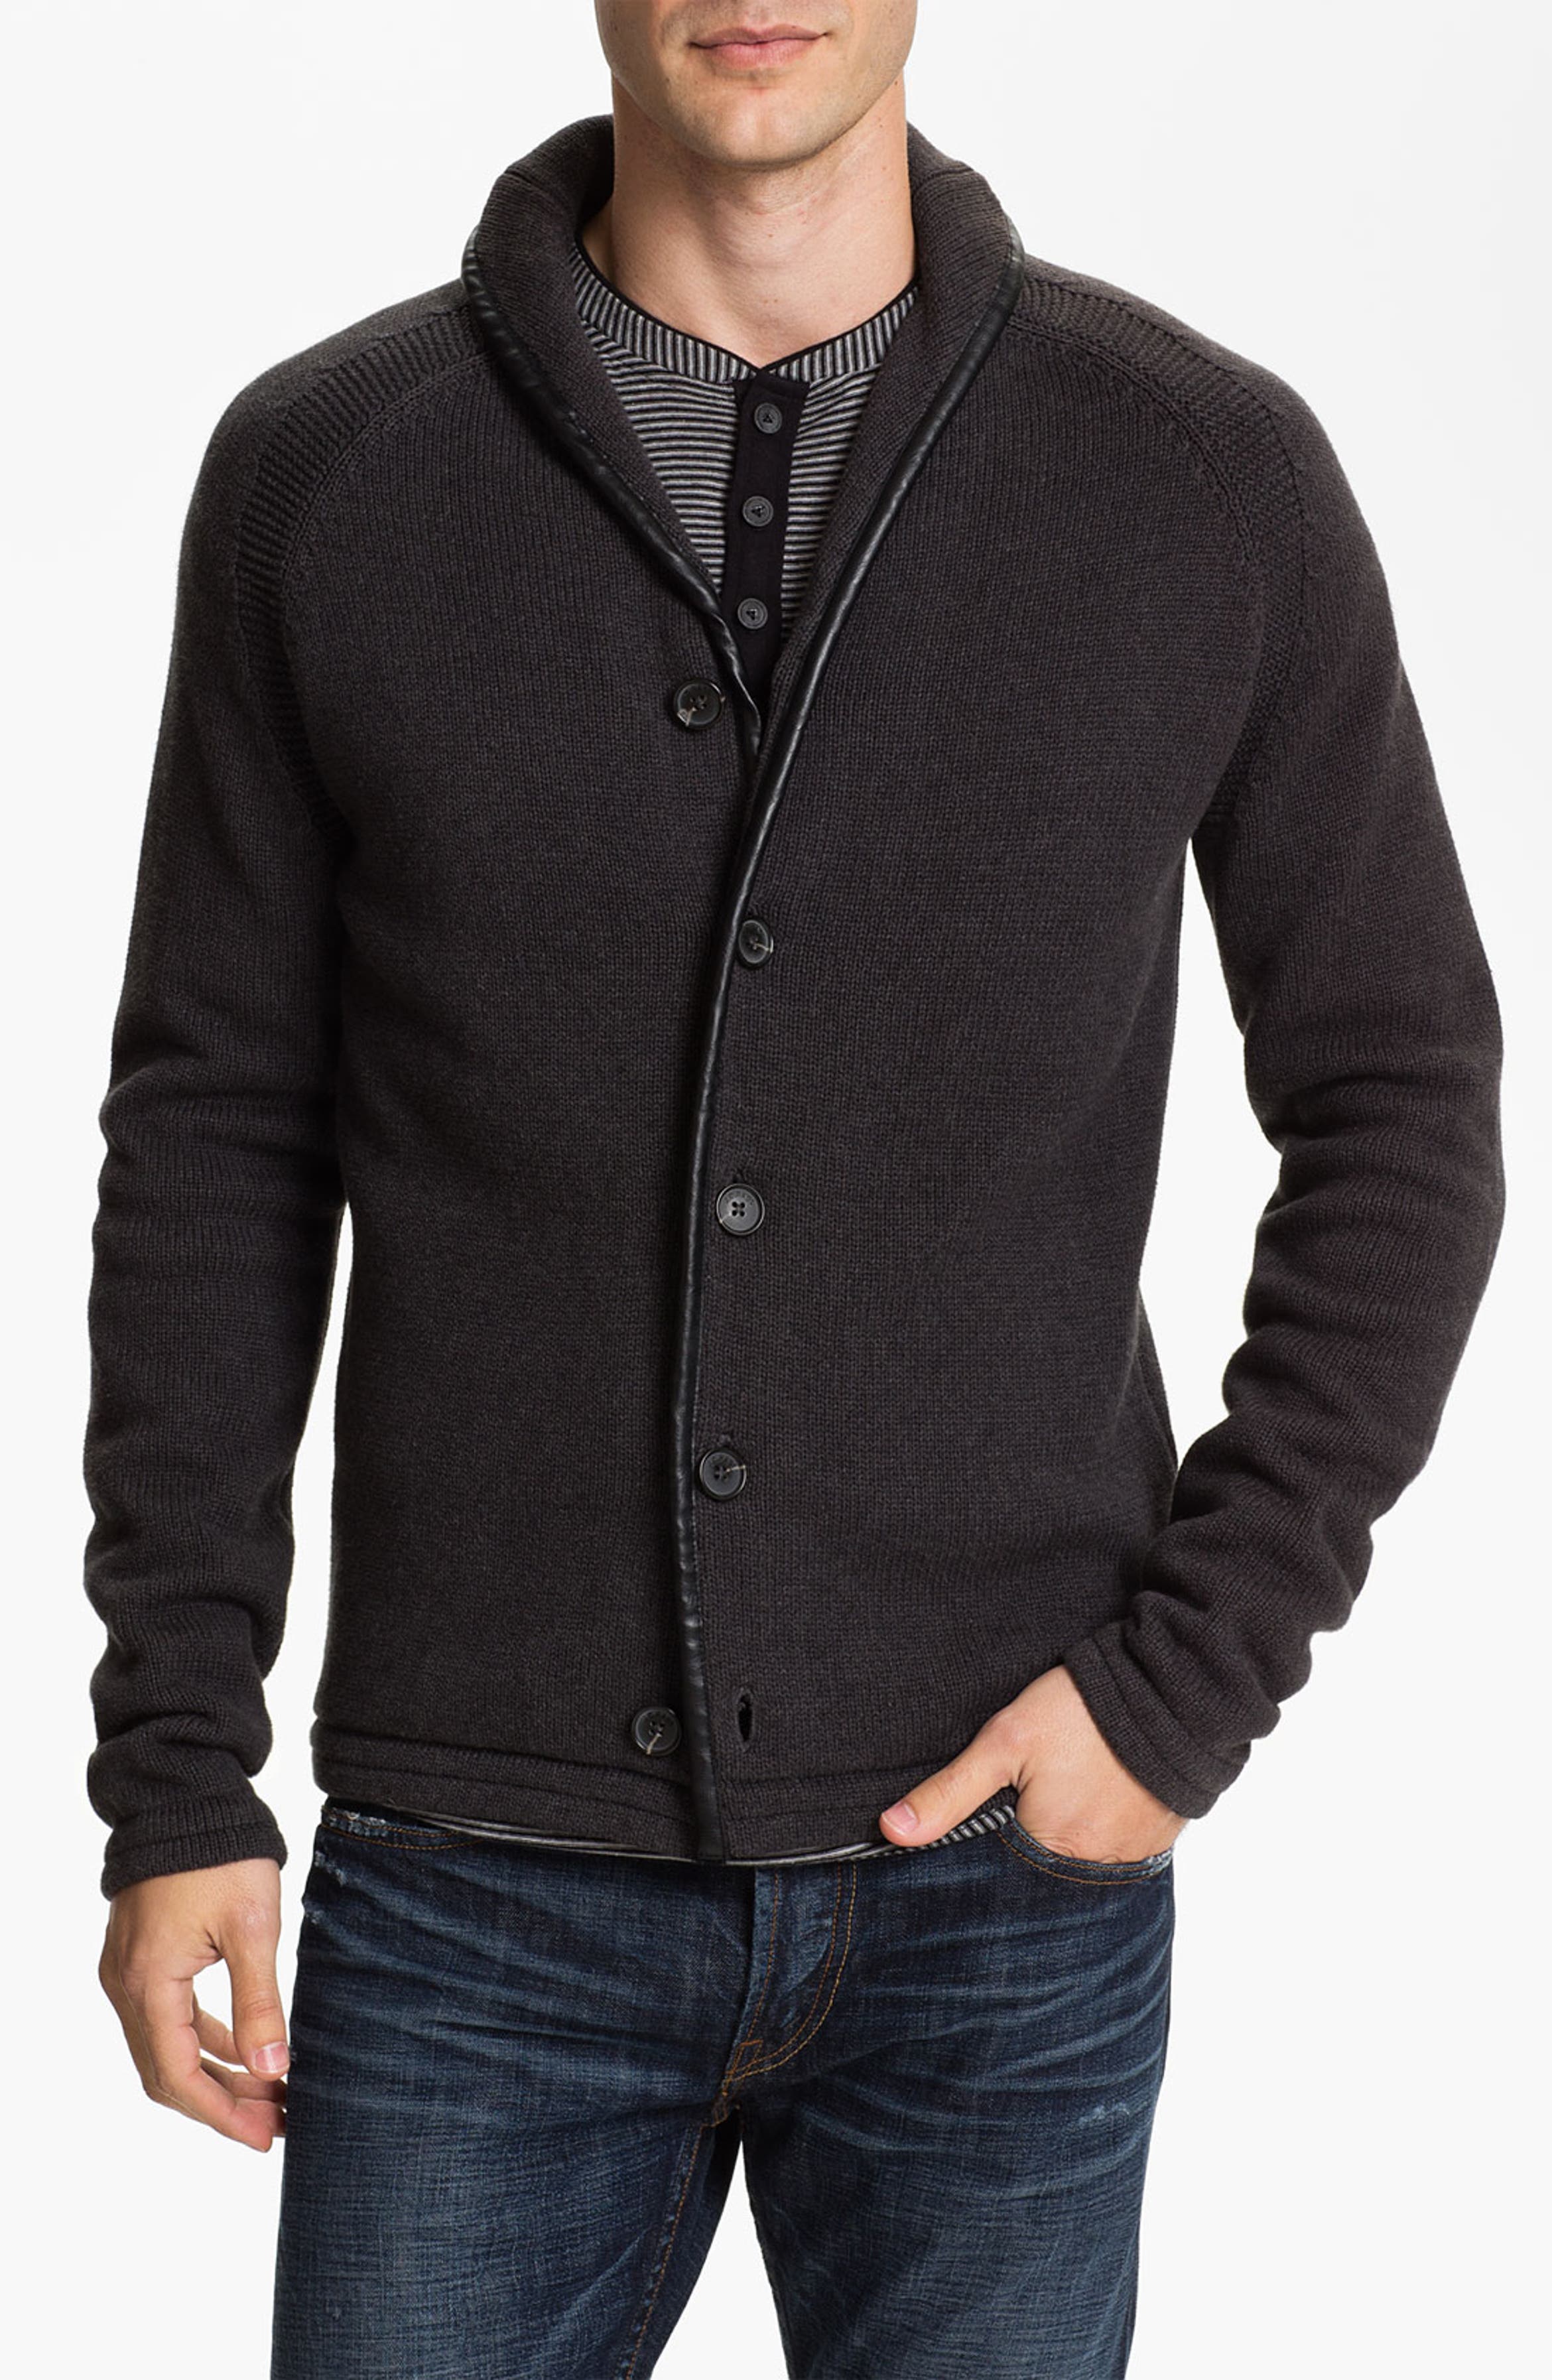 J.C. Rags 'Privat' Sweater | Nordstrom